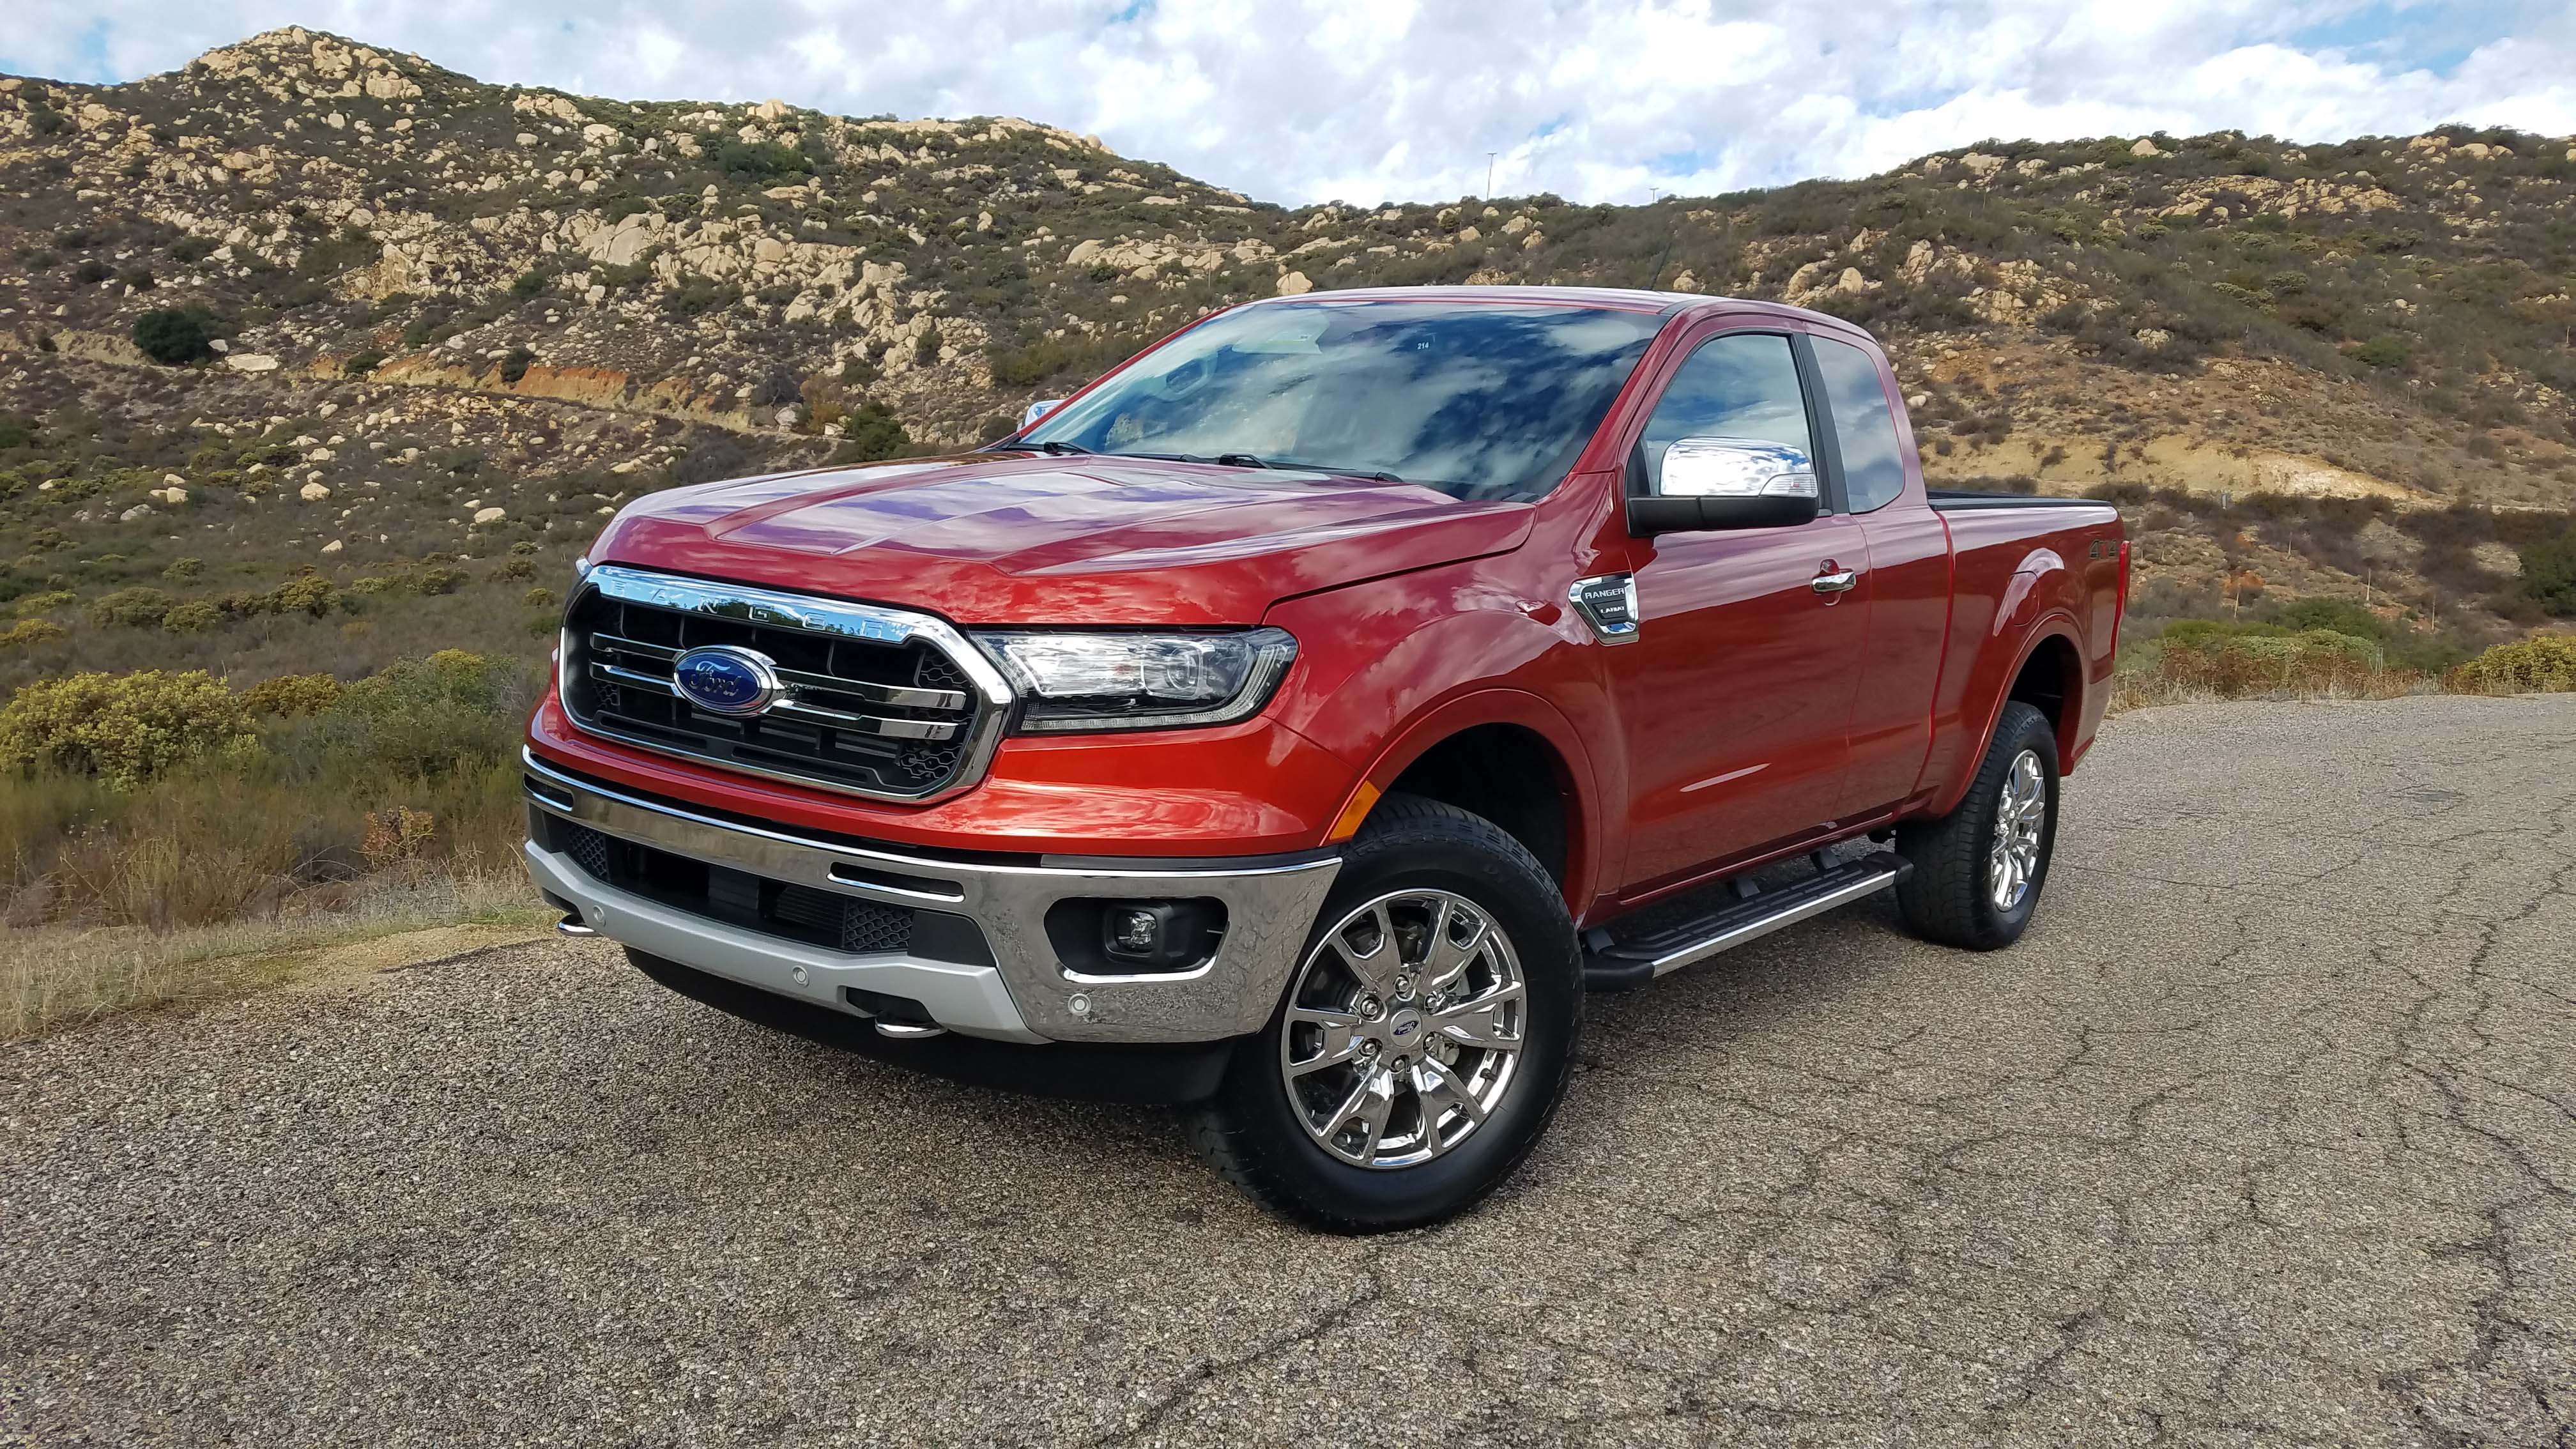 Second runner-up for The Detroit News Vehicle of the Year is the 2019 Ford Ranger. The Lariat SuperCab shown here comes with a 6-foot bed and a $37,305 price tag.